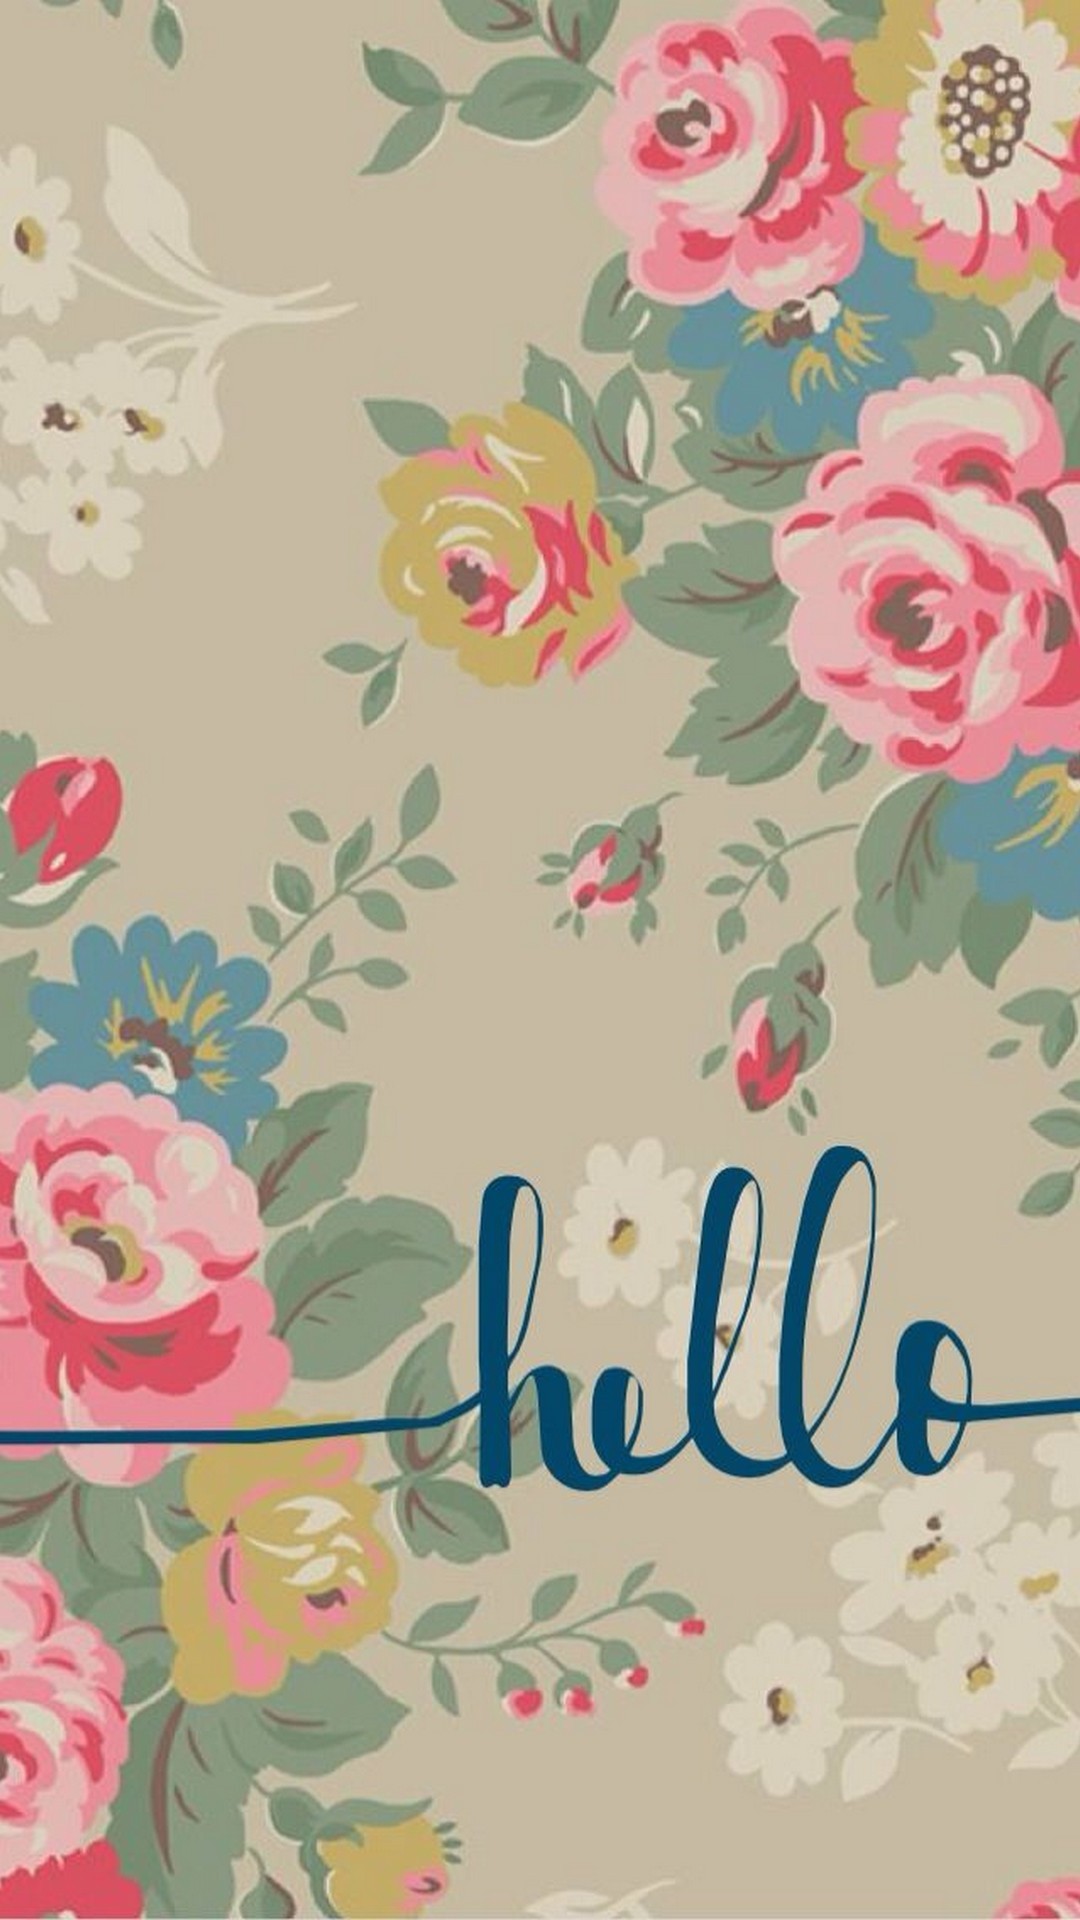 cute phone wallpapers,pattern,pink,text,floral design,rose